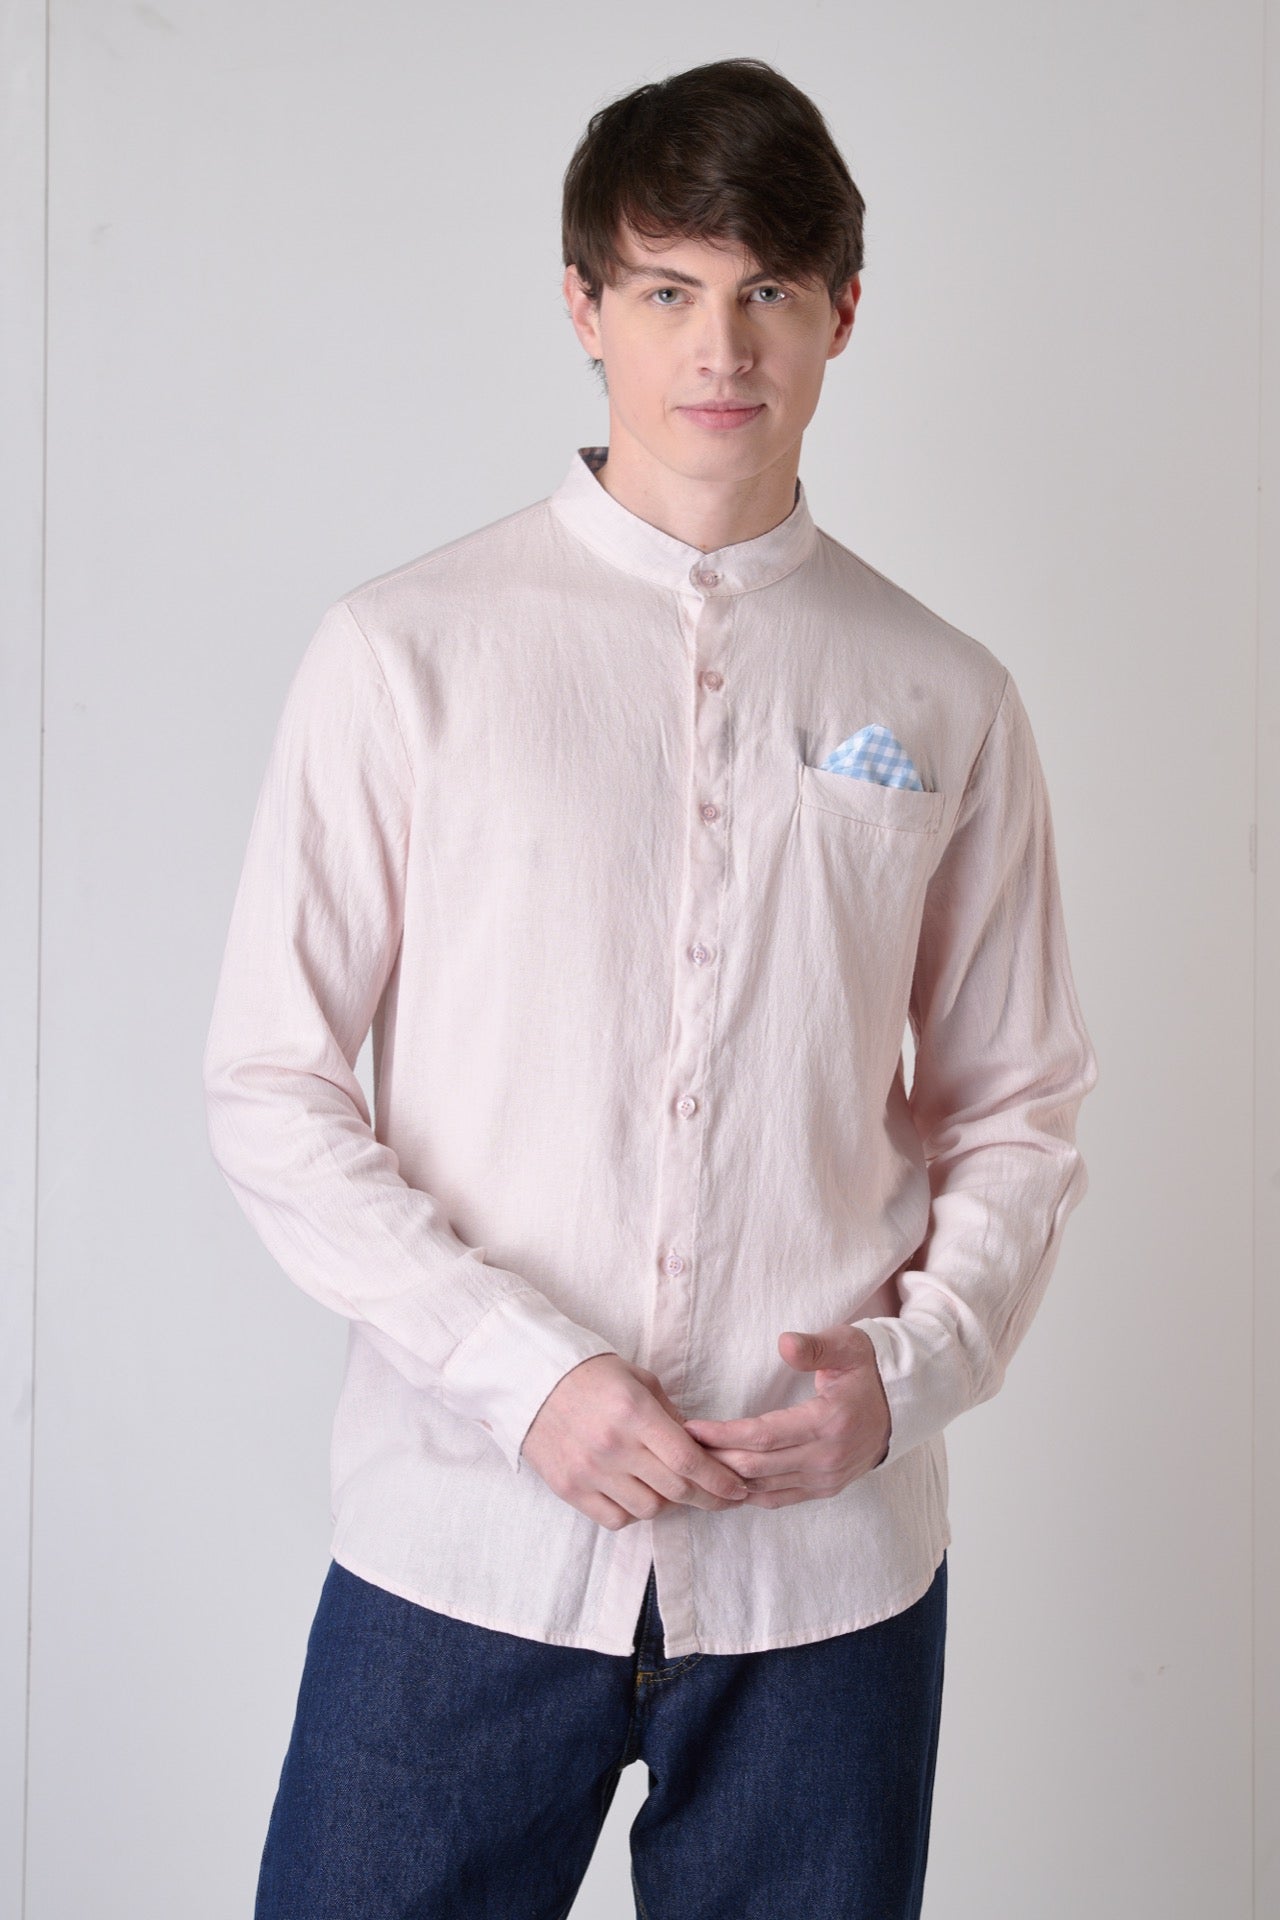 Korean Tailored Shirt in Powder Pink Linen with Pocket Square, Interior and Cuffs in V2 Fabric